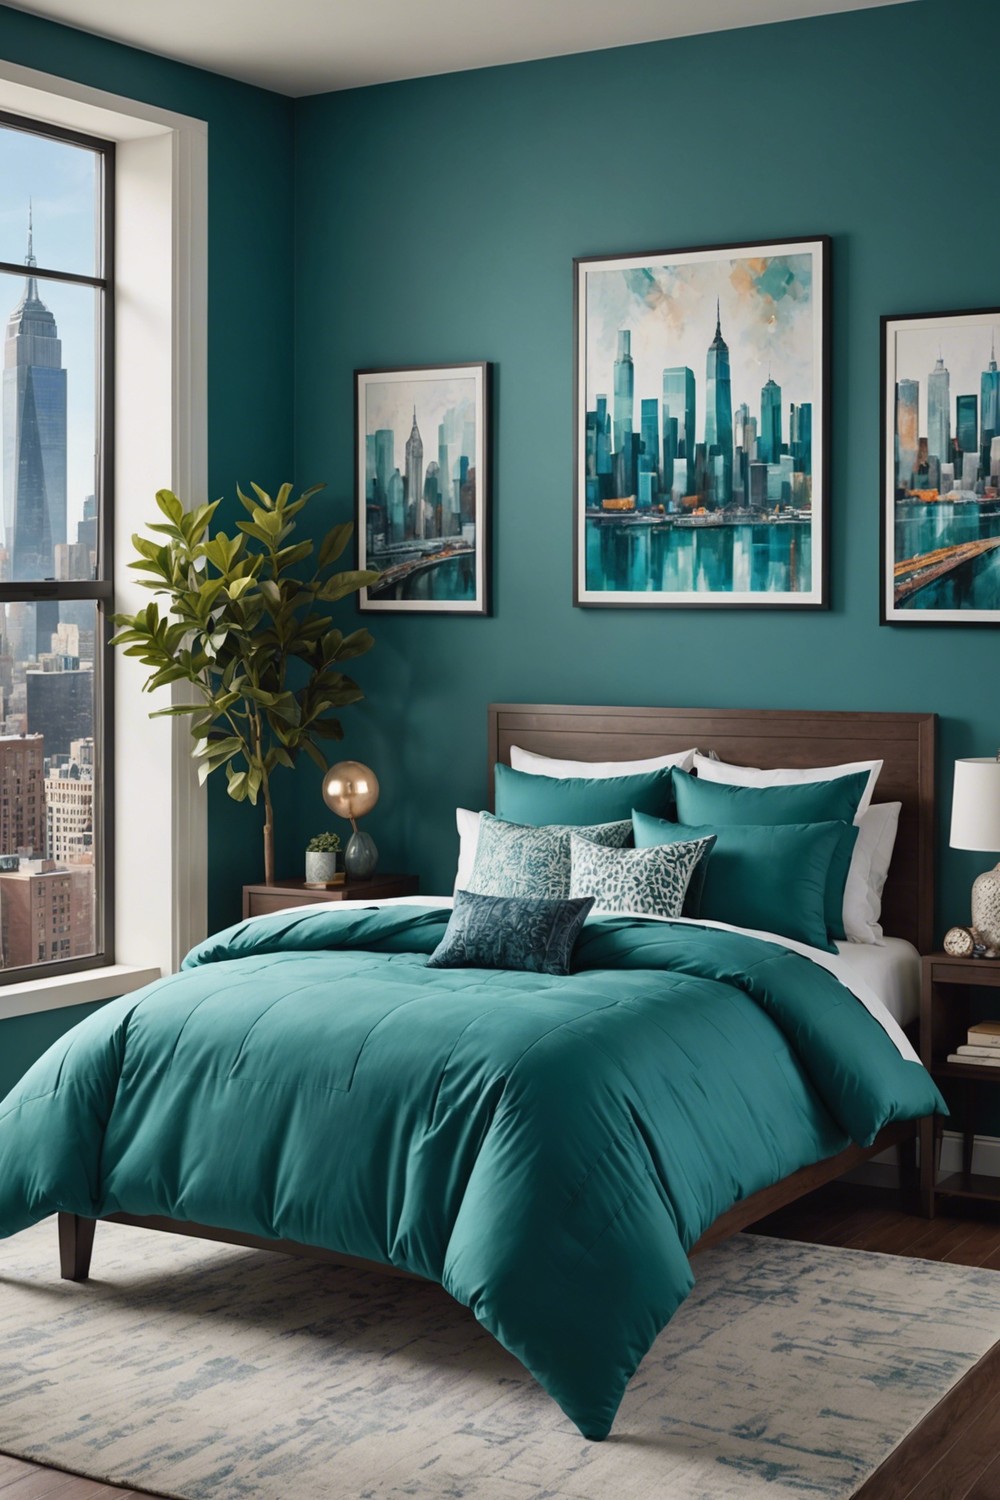 Urban Oasis: Teal with City-Inspired Art